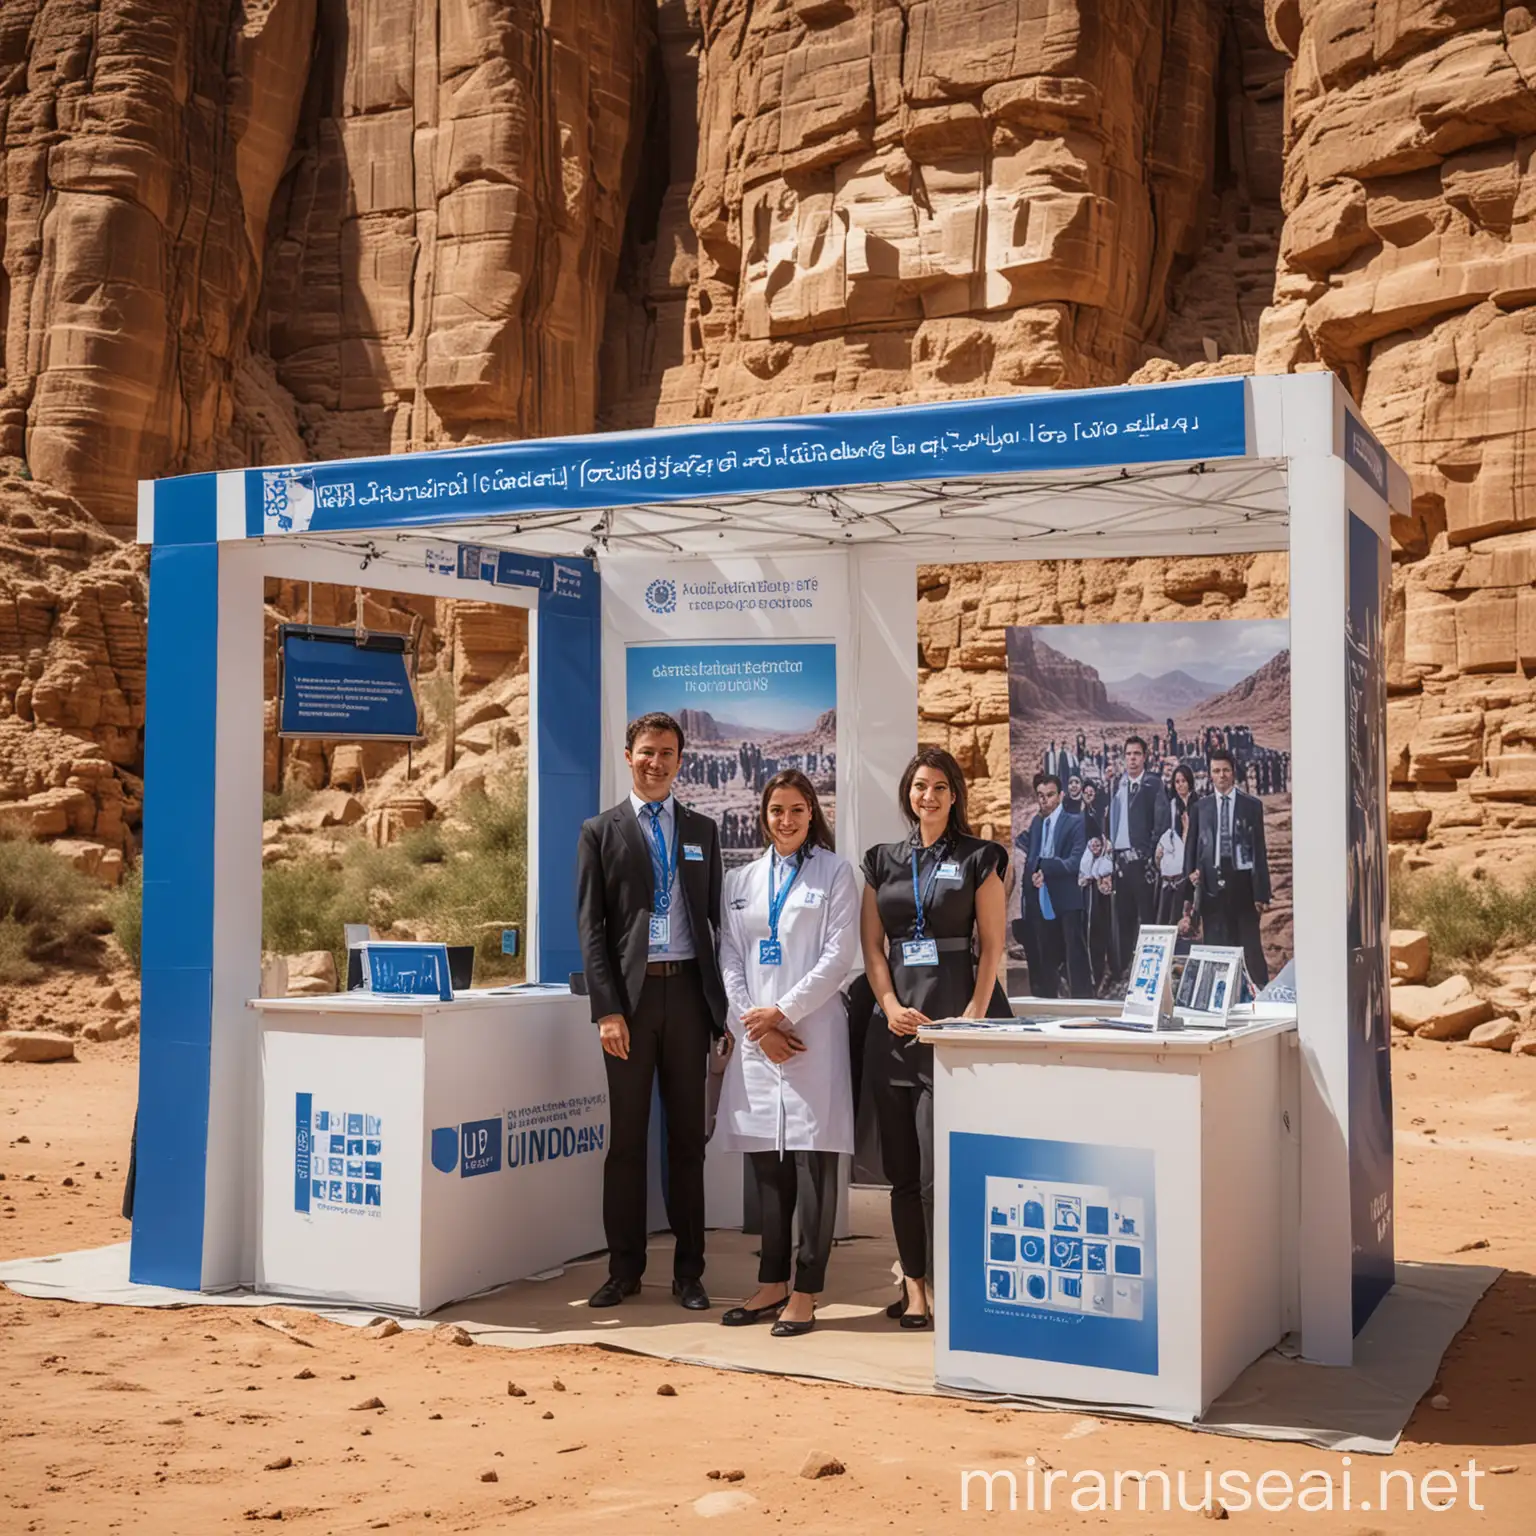 A realistic picture of promotional UNDP booth with UNDP staff in a location that matches the aesthetic of Petra Jordan